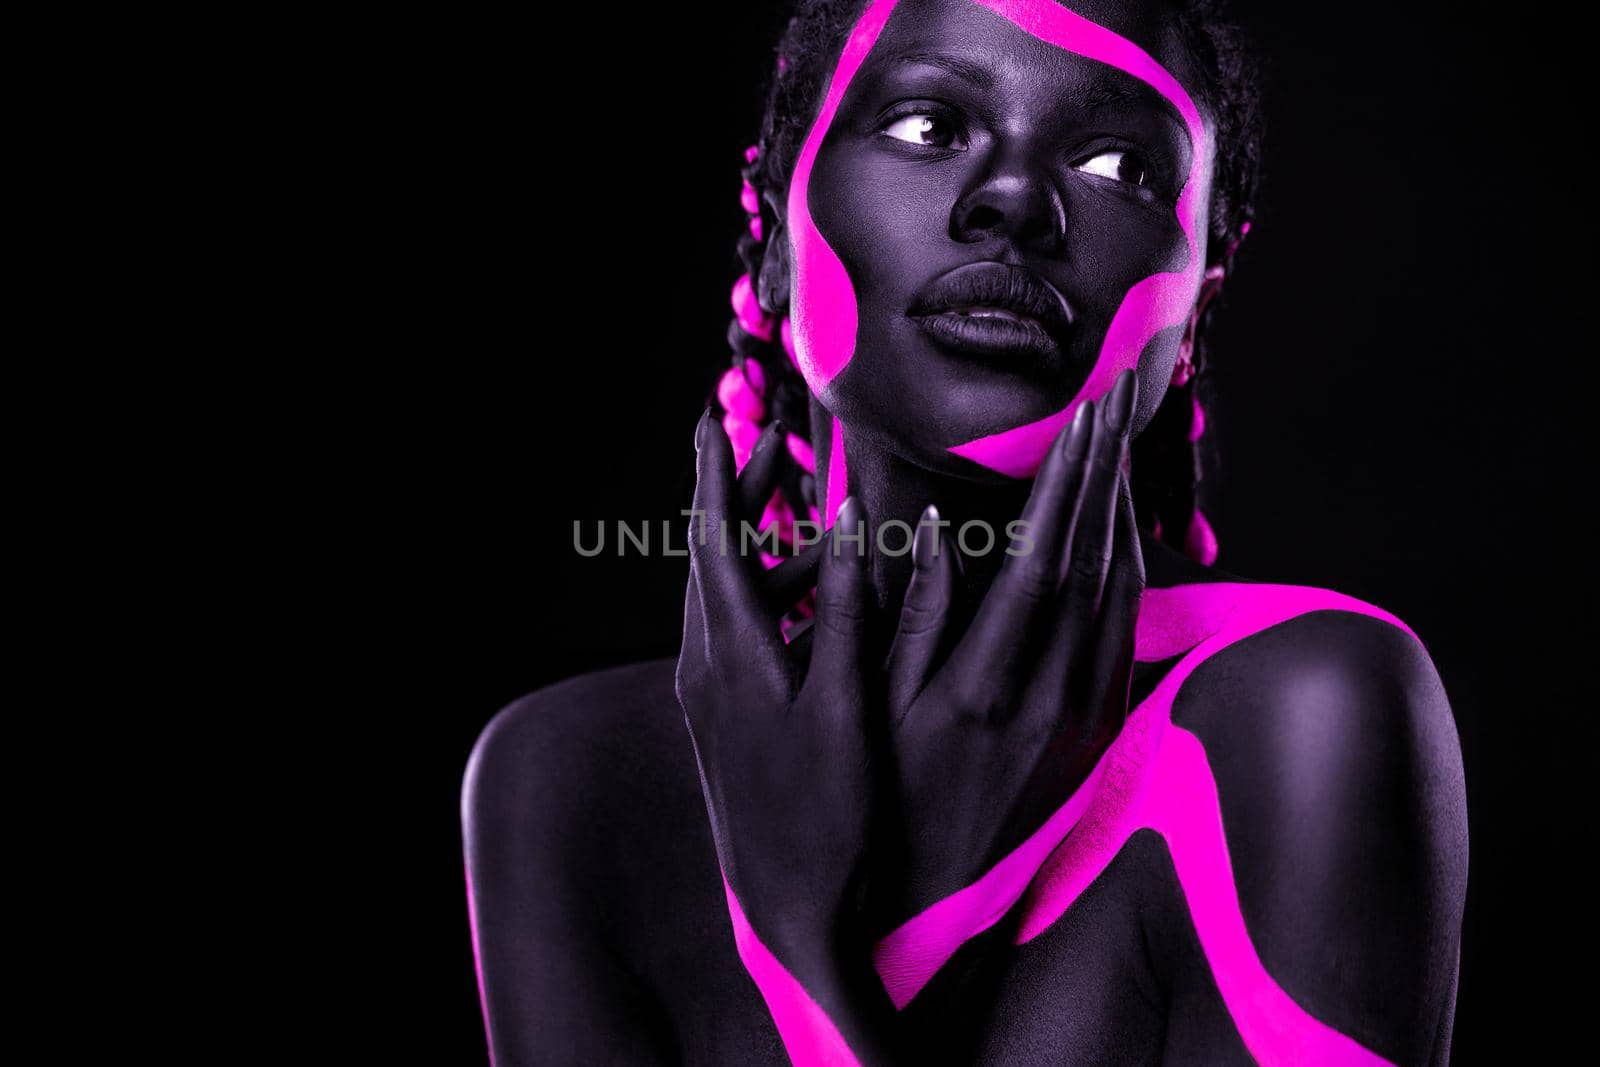 Neon colors. Pink and black body paint. Woman with face art. Young girl with colorful bodypaint. An amazing afro american model with makeup